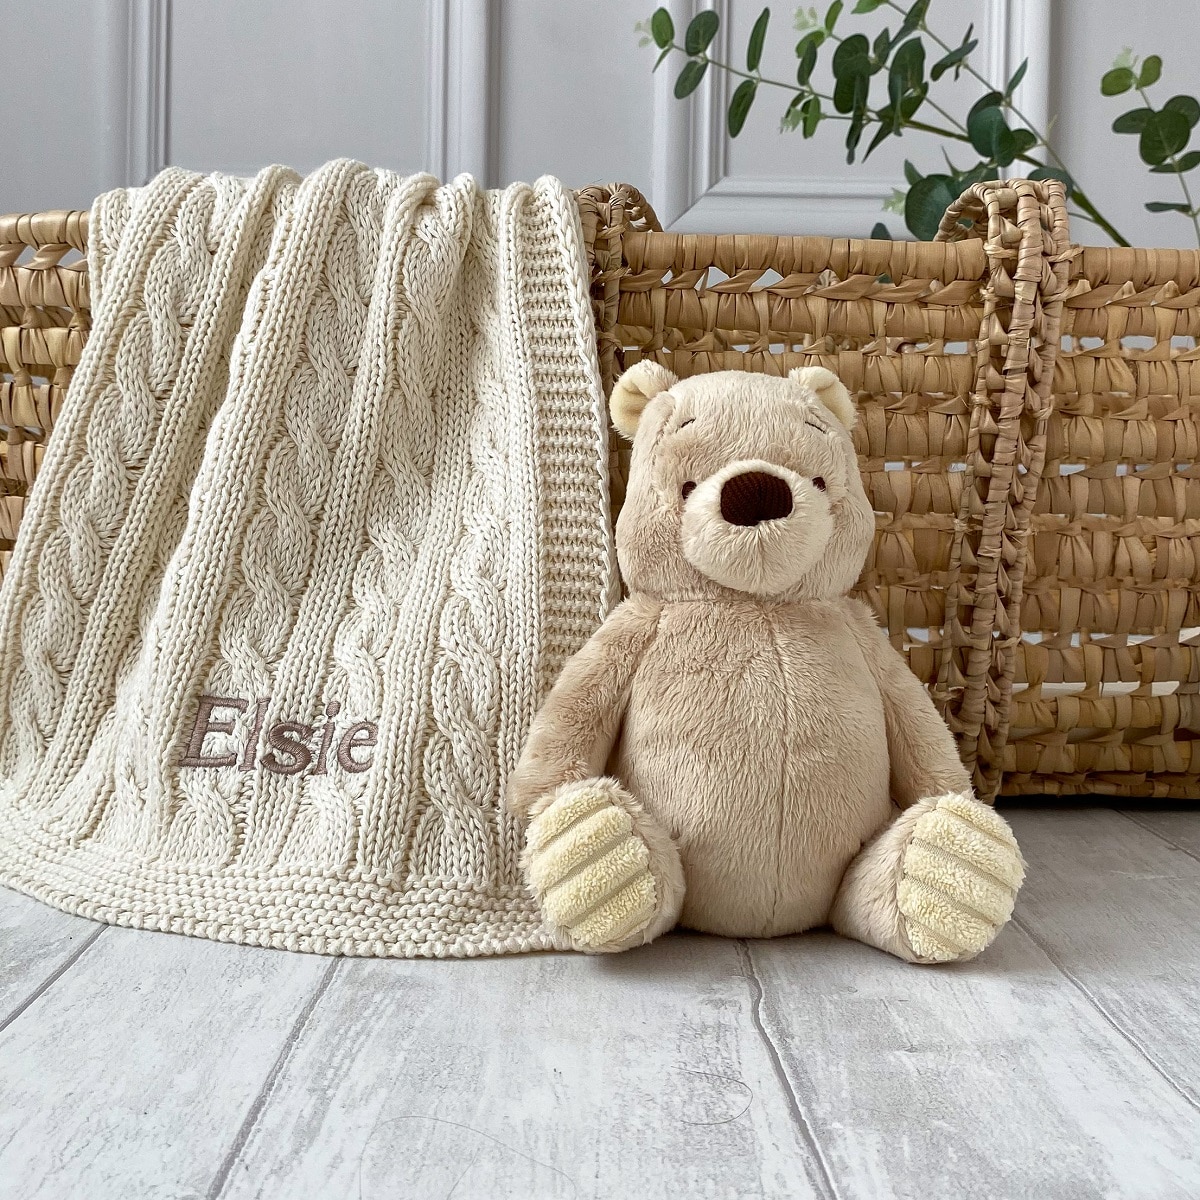 Toffee Moon personalised baby blanket and Winnie the Pooh soft toy